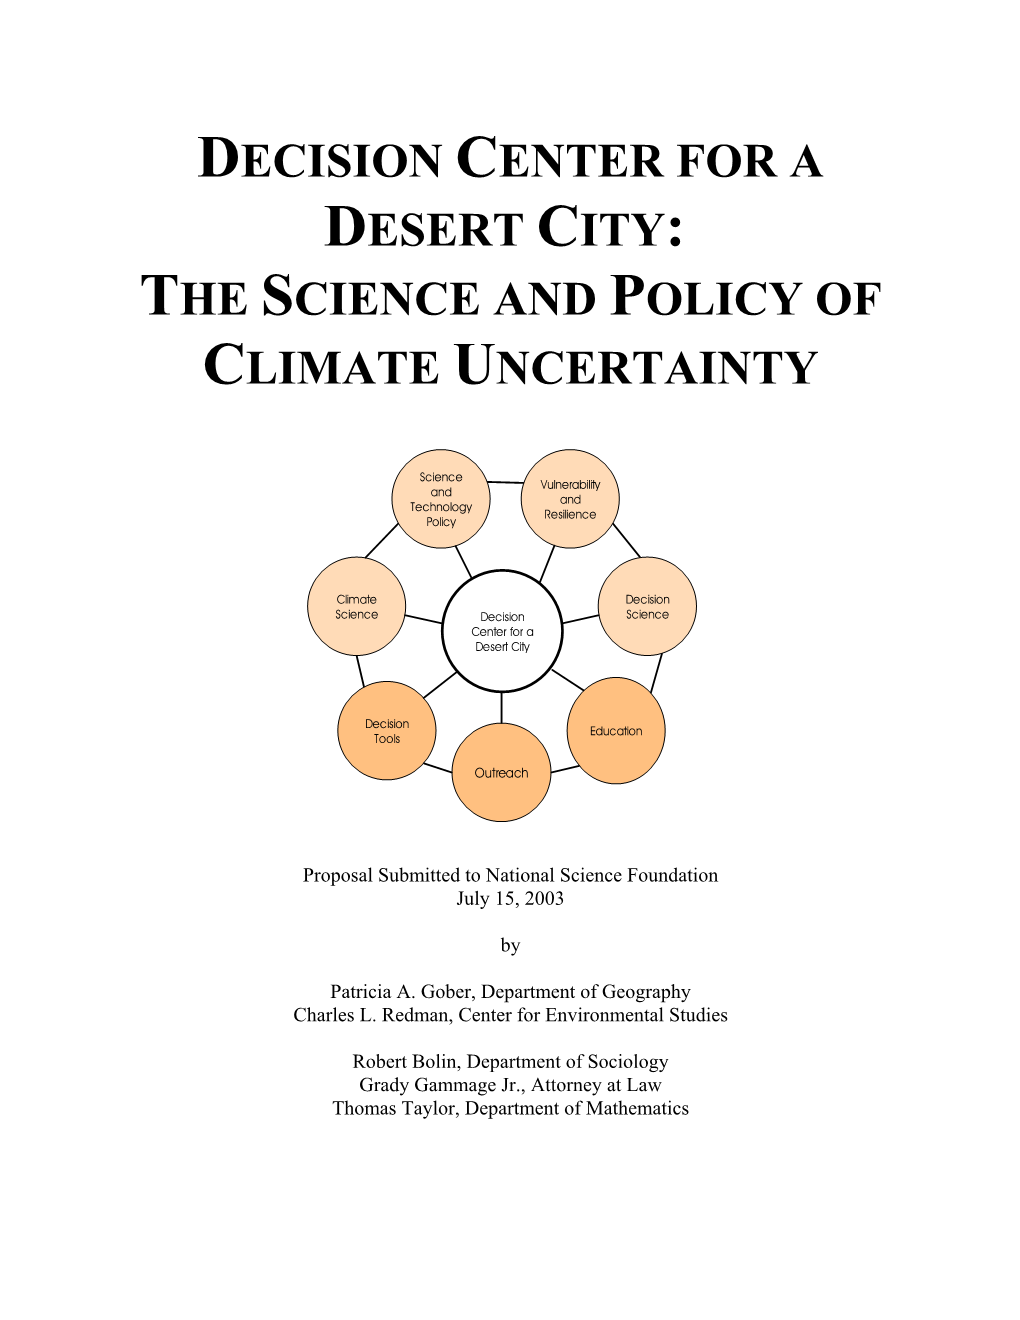 Decision Center for a Desert City: the Science and Policy of Climate Uncertainty